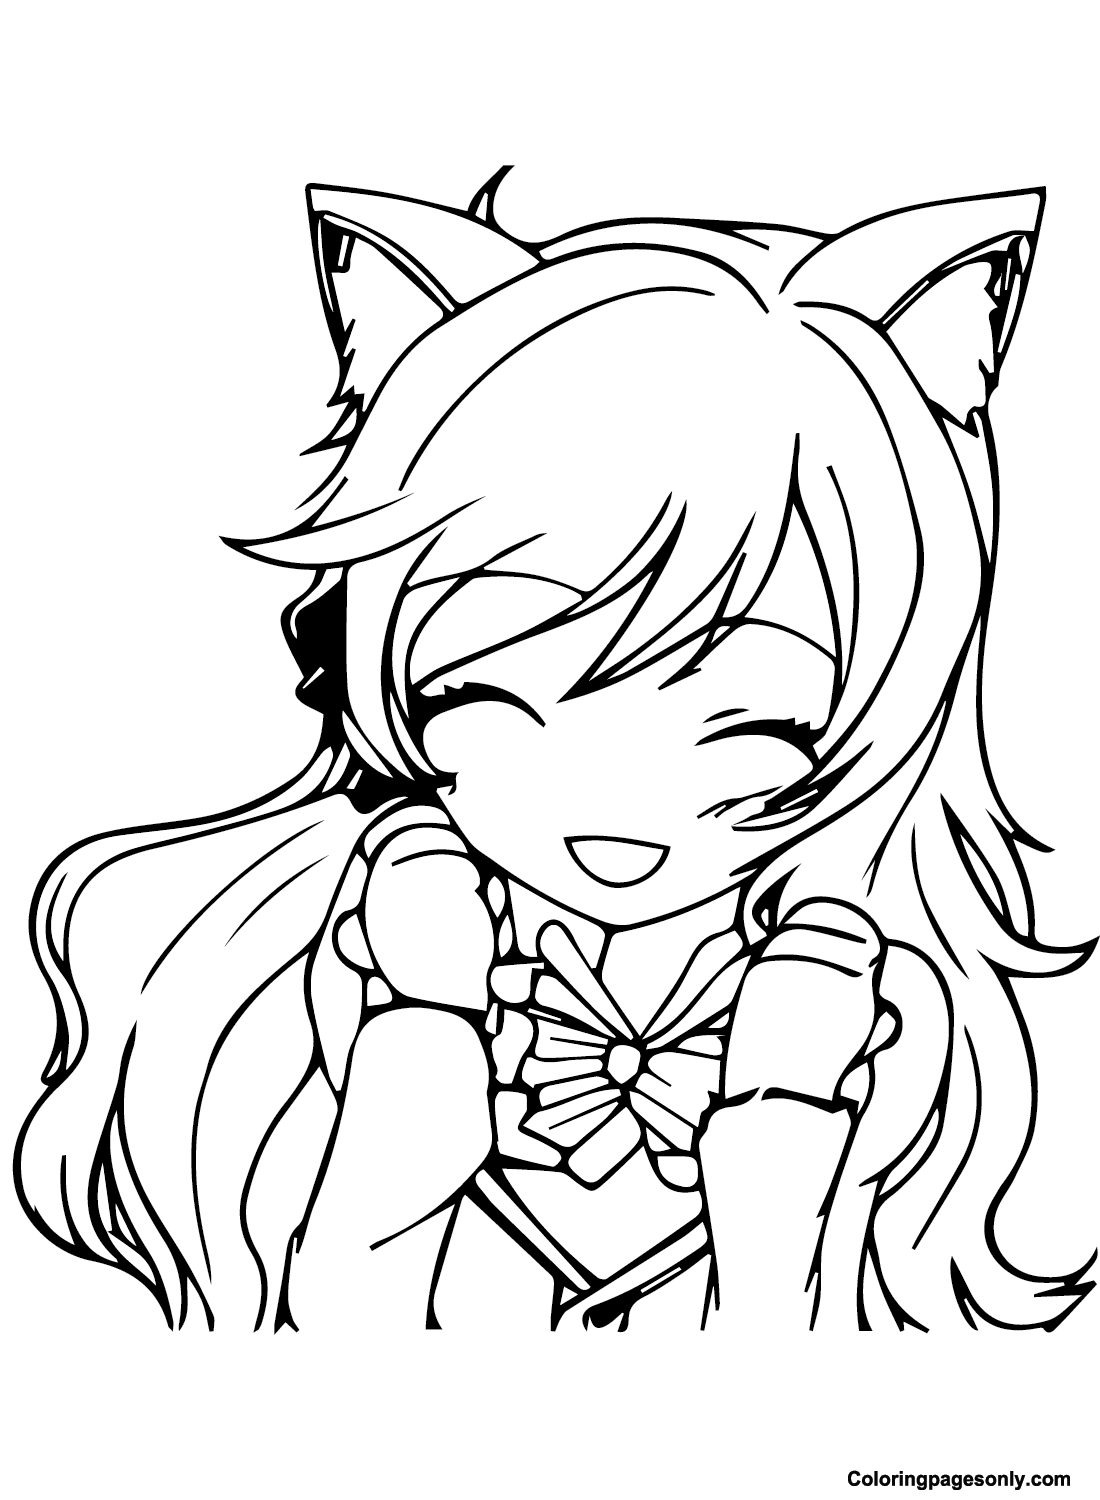 Aphmau Anime Coloring Page